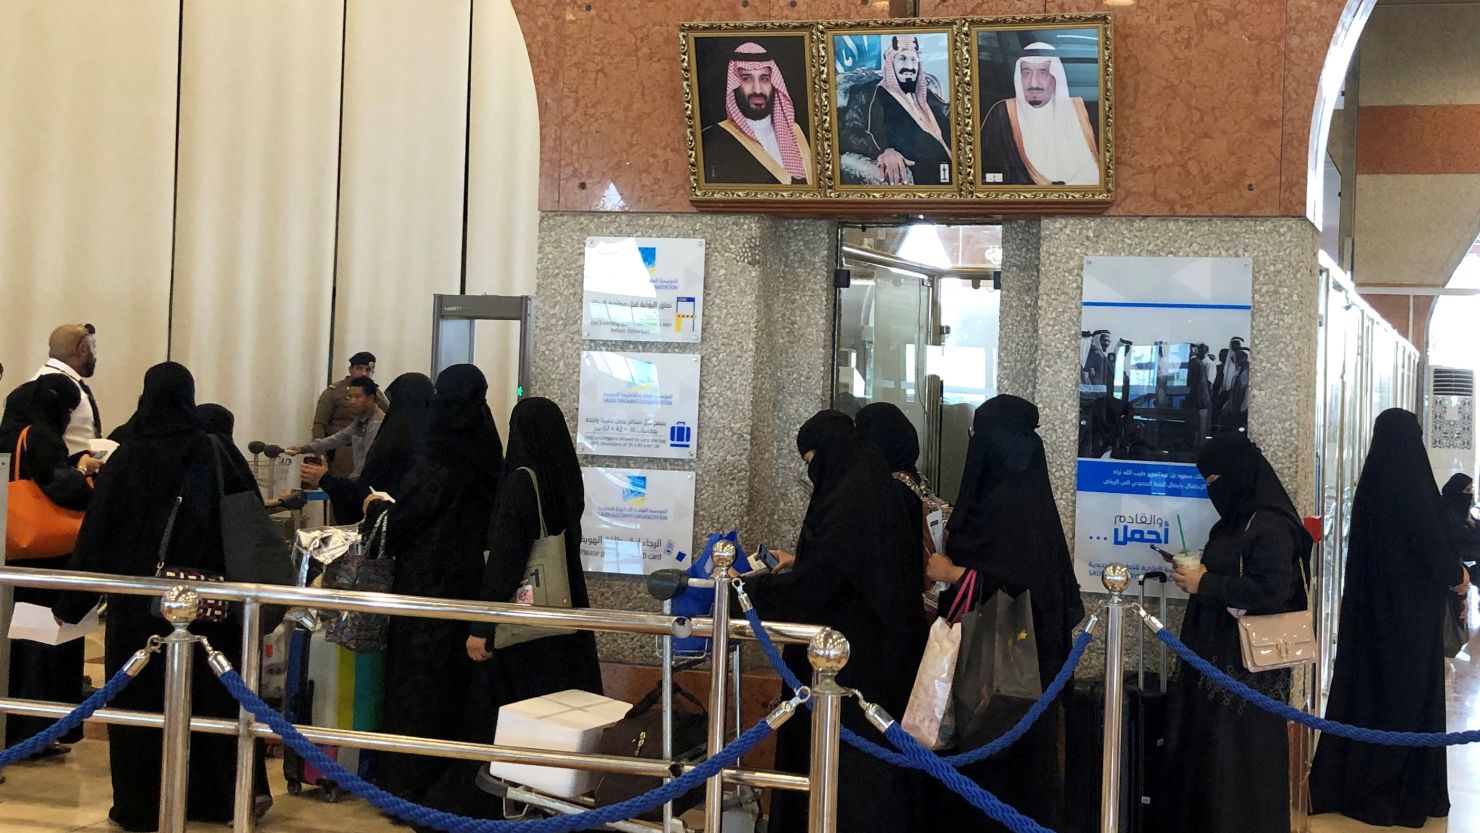 A job advert for women train drivers in Saudi Arabia has attracted tens of thousands of applications.